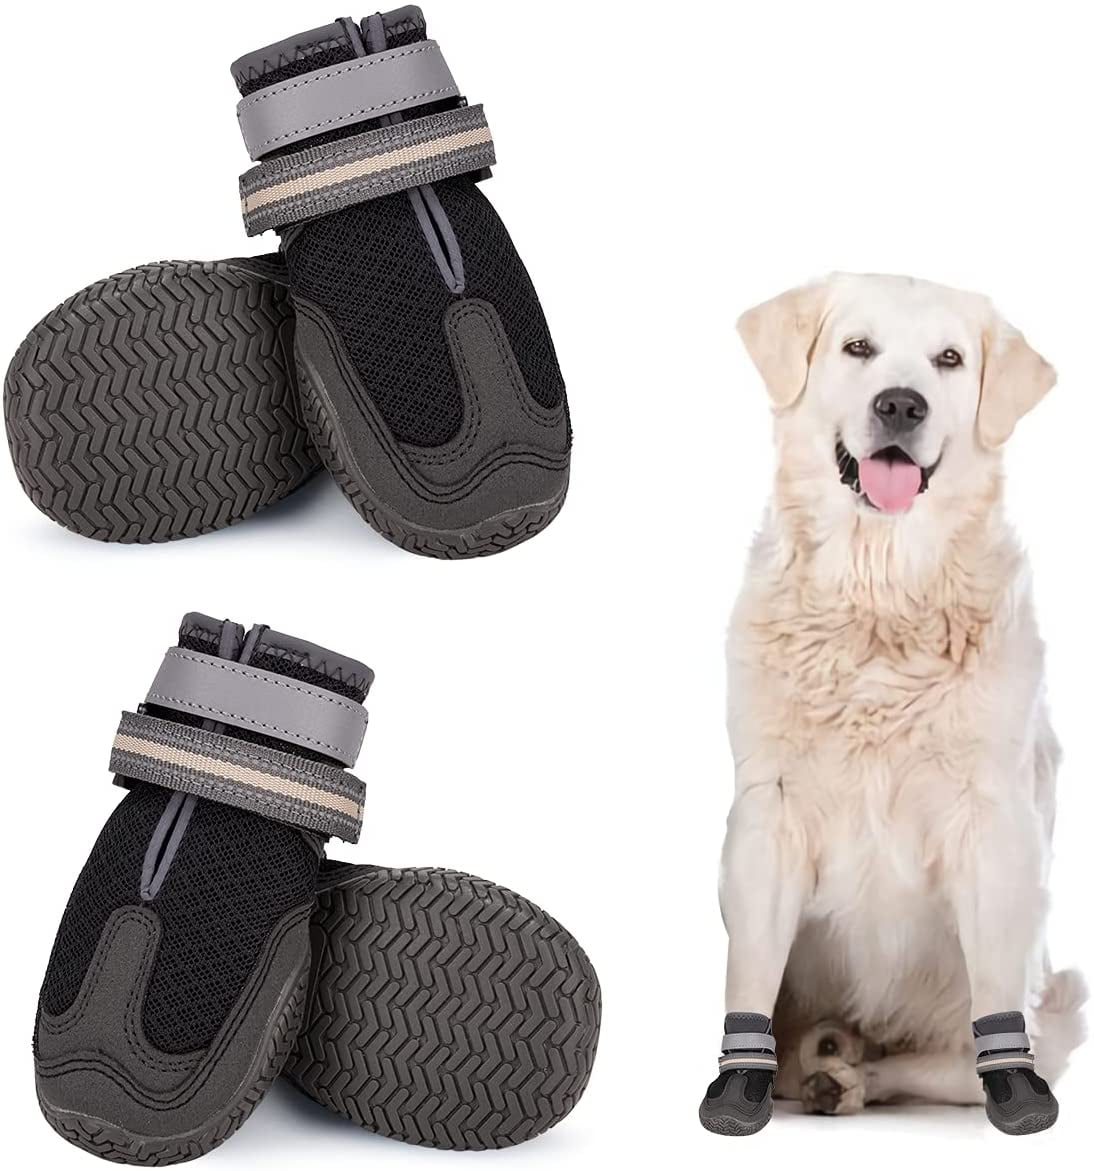 Waterproof Dog Booties with Reflective Strap Anti Slip Rubber Sole Warm Dog Winter Snow Boots Dog Shoes for Large Medium Dogs Comfortable Dog Hiking Boots Walking Jogging Indoor Outdoor 